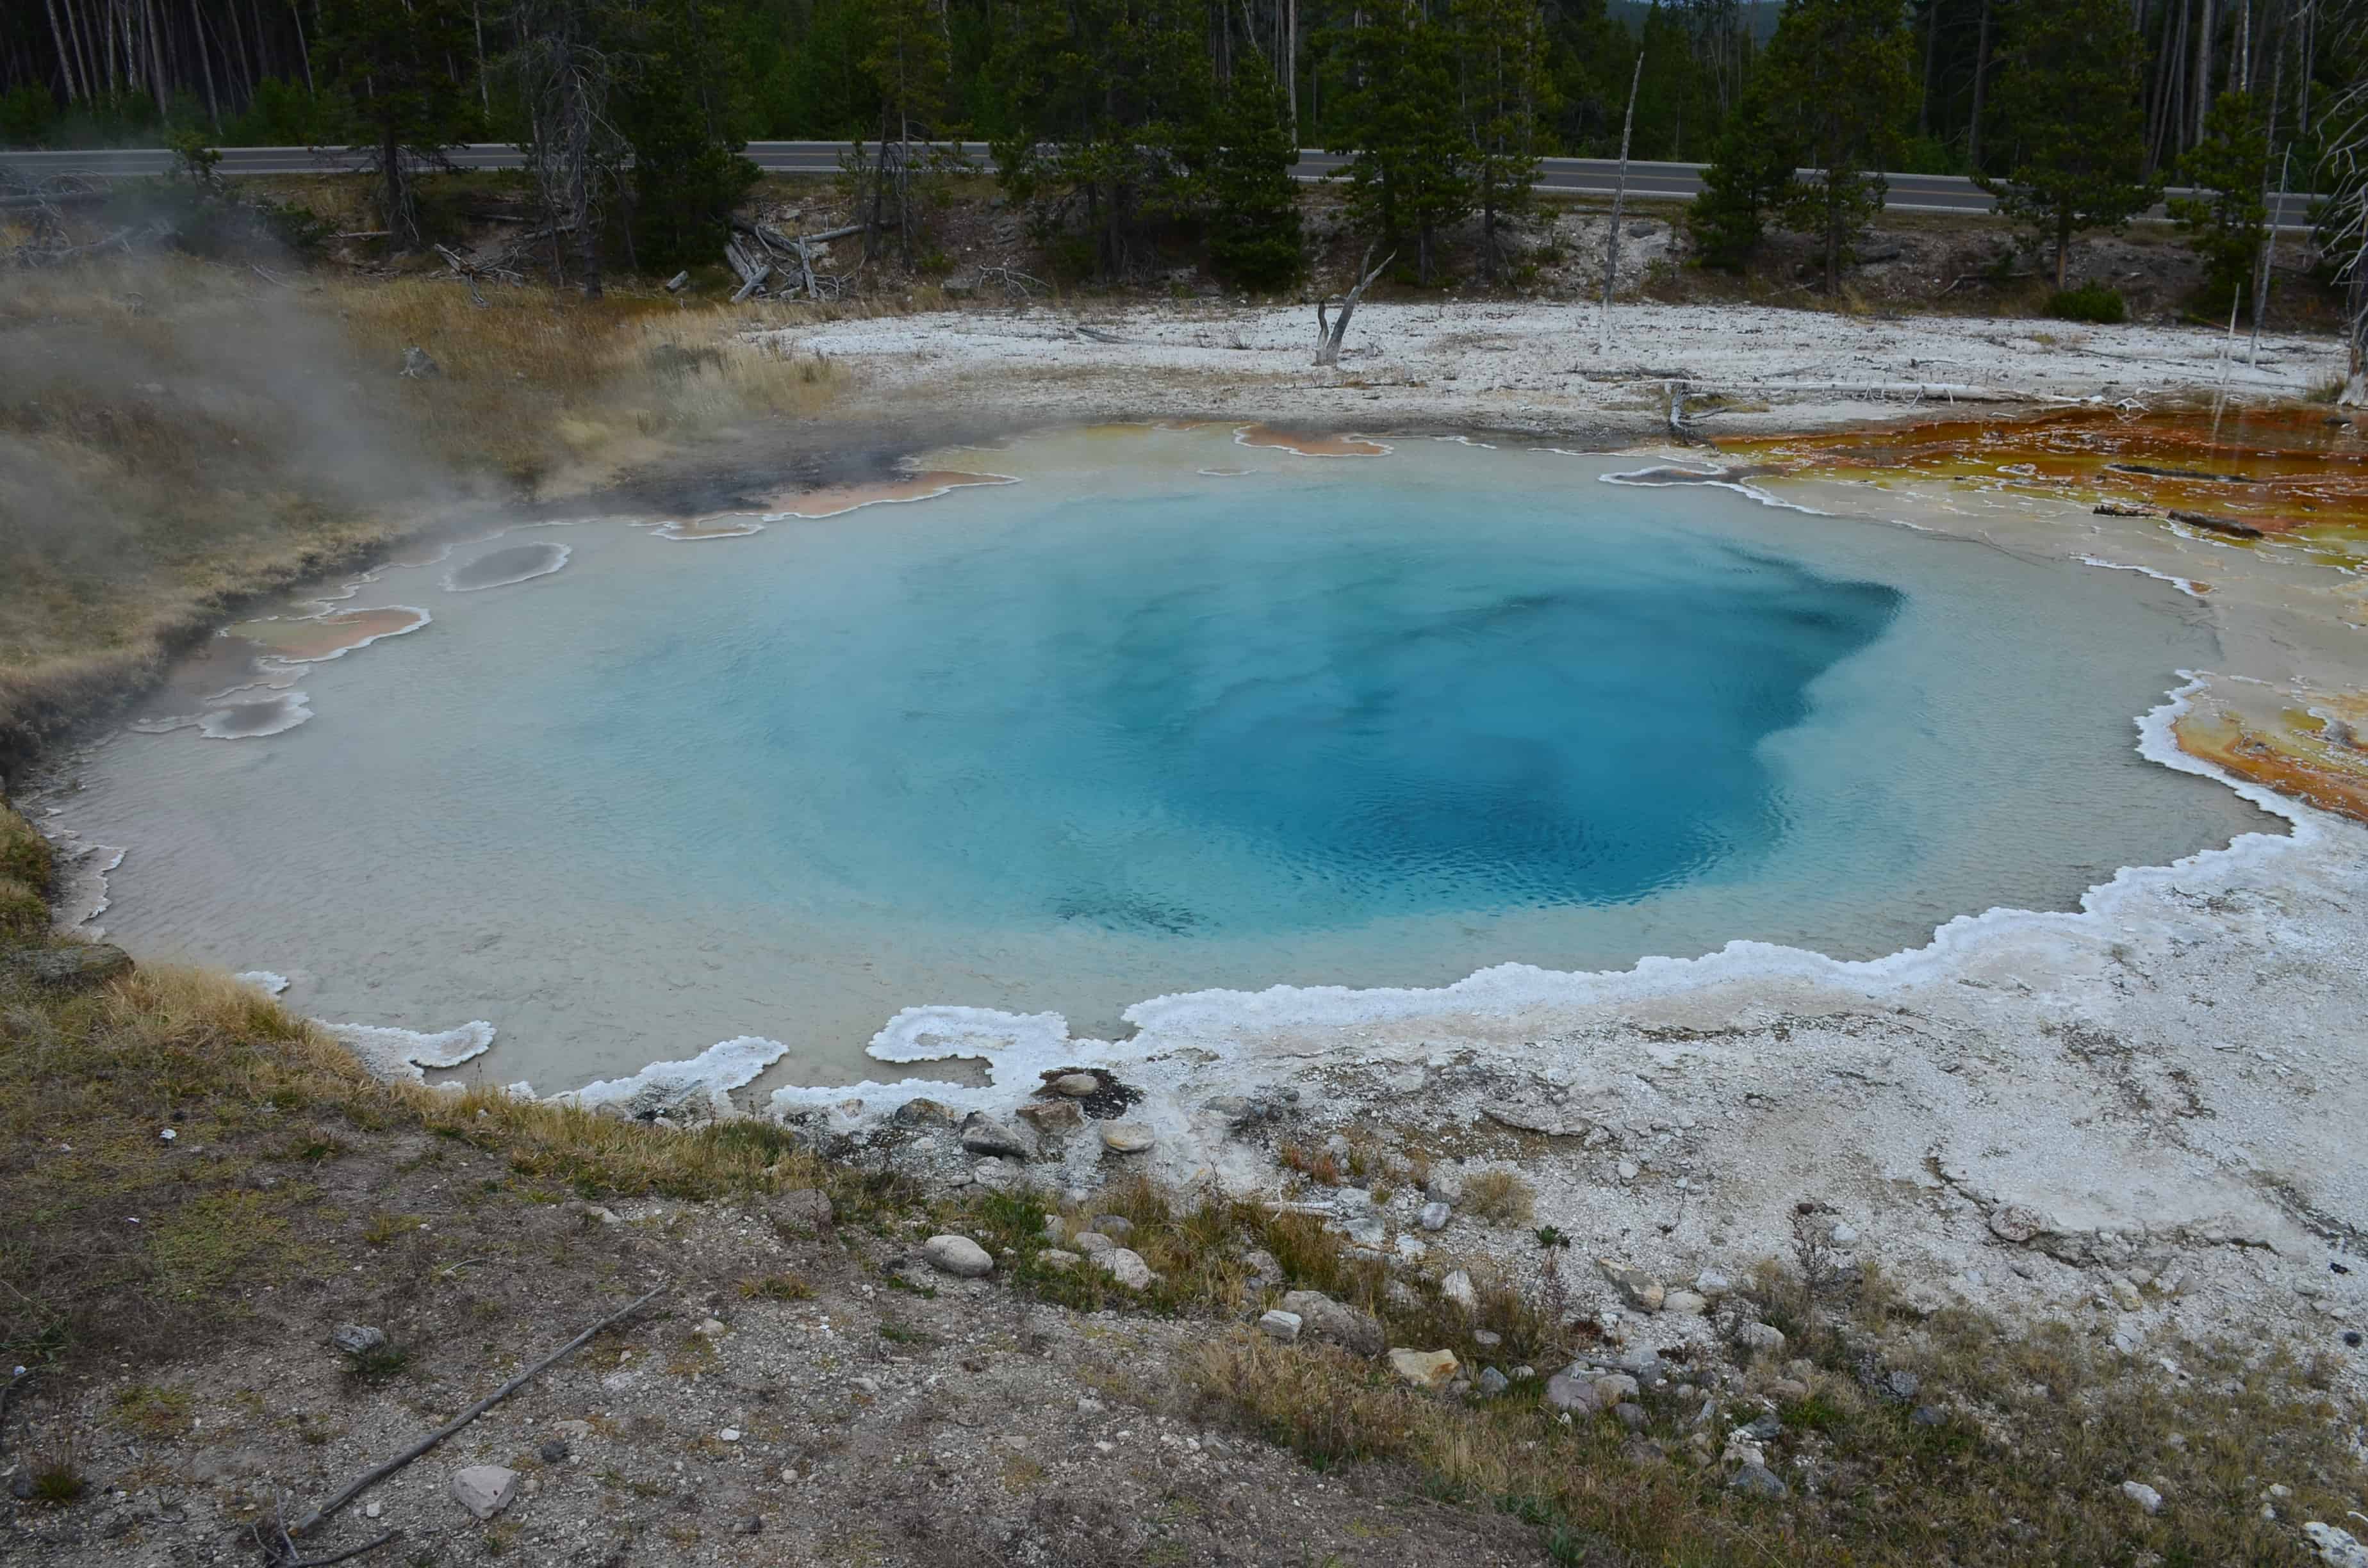 Silex Spring at the Lower Geyser Basin in Yellowstone National Park, Wyoming